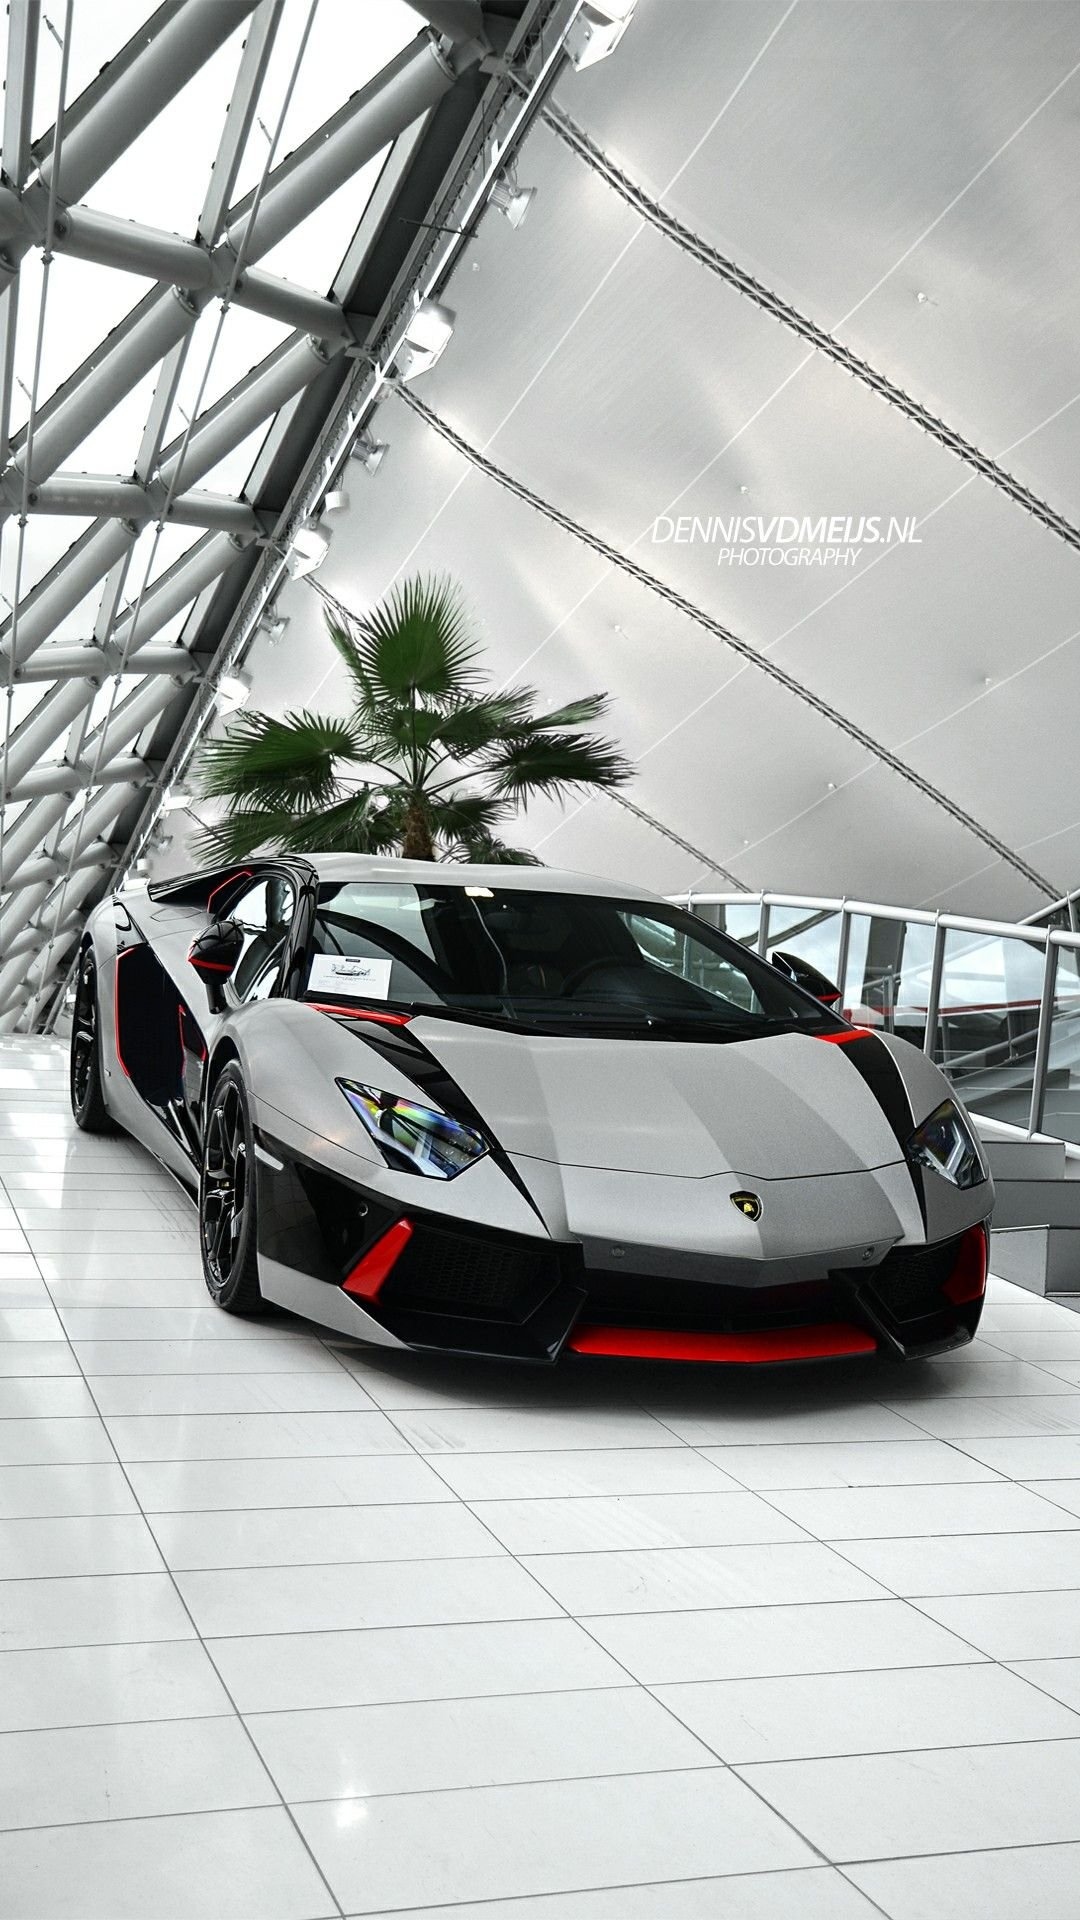 Lamborghini cell phone wallpapers, High-resolution images, Iconic sports cars, Speed and luxury, 1080x1920 Full HD Phone